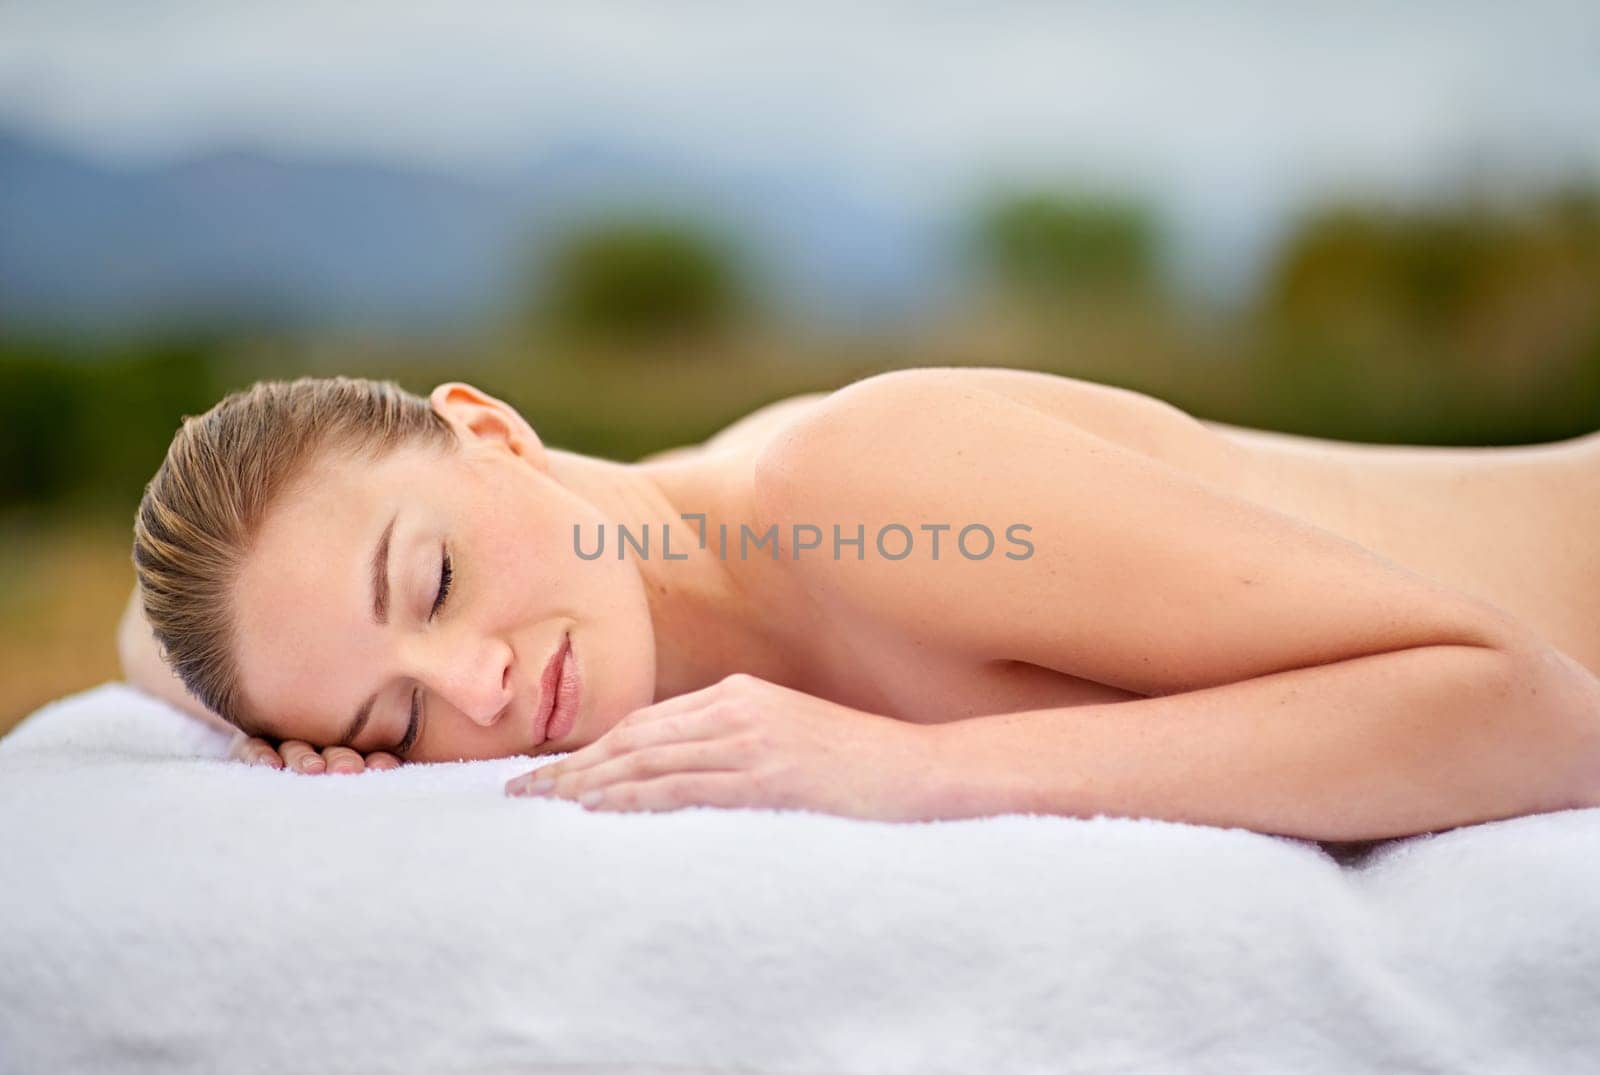 Woman, relax and massage table in spa, therapy and self care for body wellness and resting for tension. Comfortable and resort with client, stress free and healing, calm session and cosmetology.